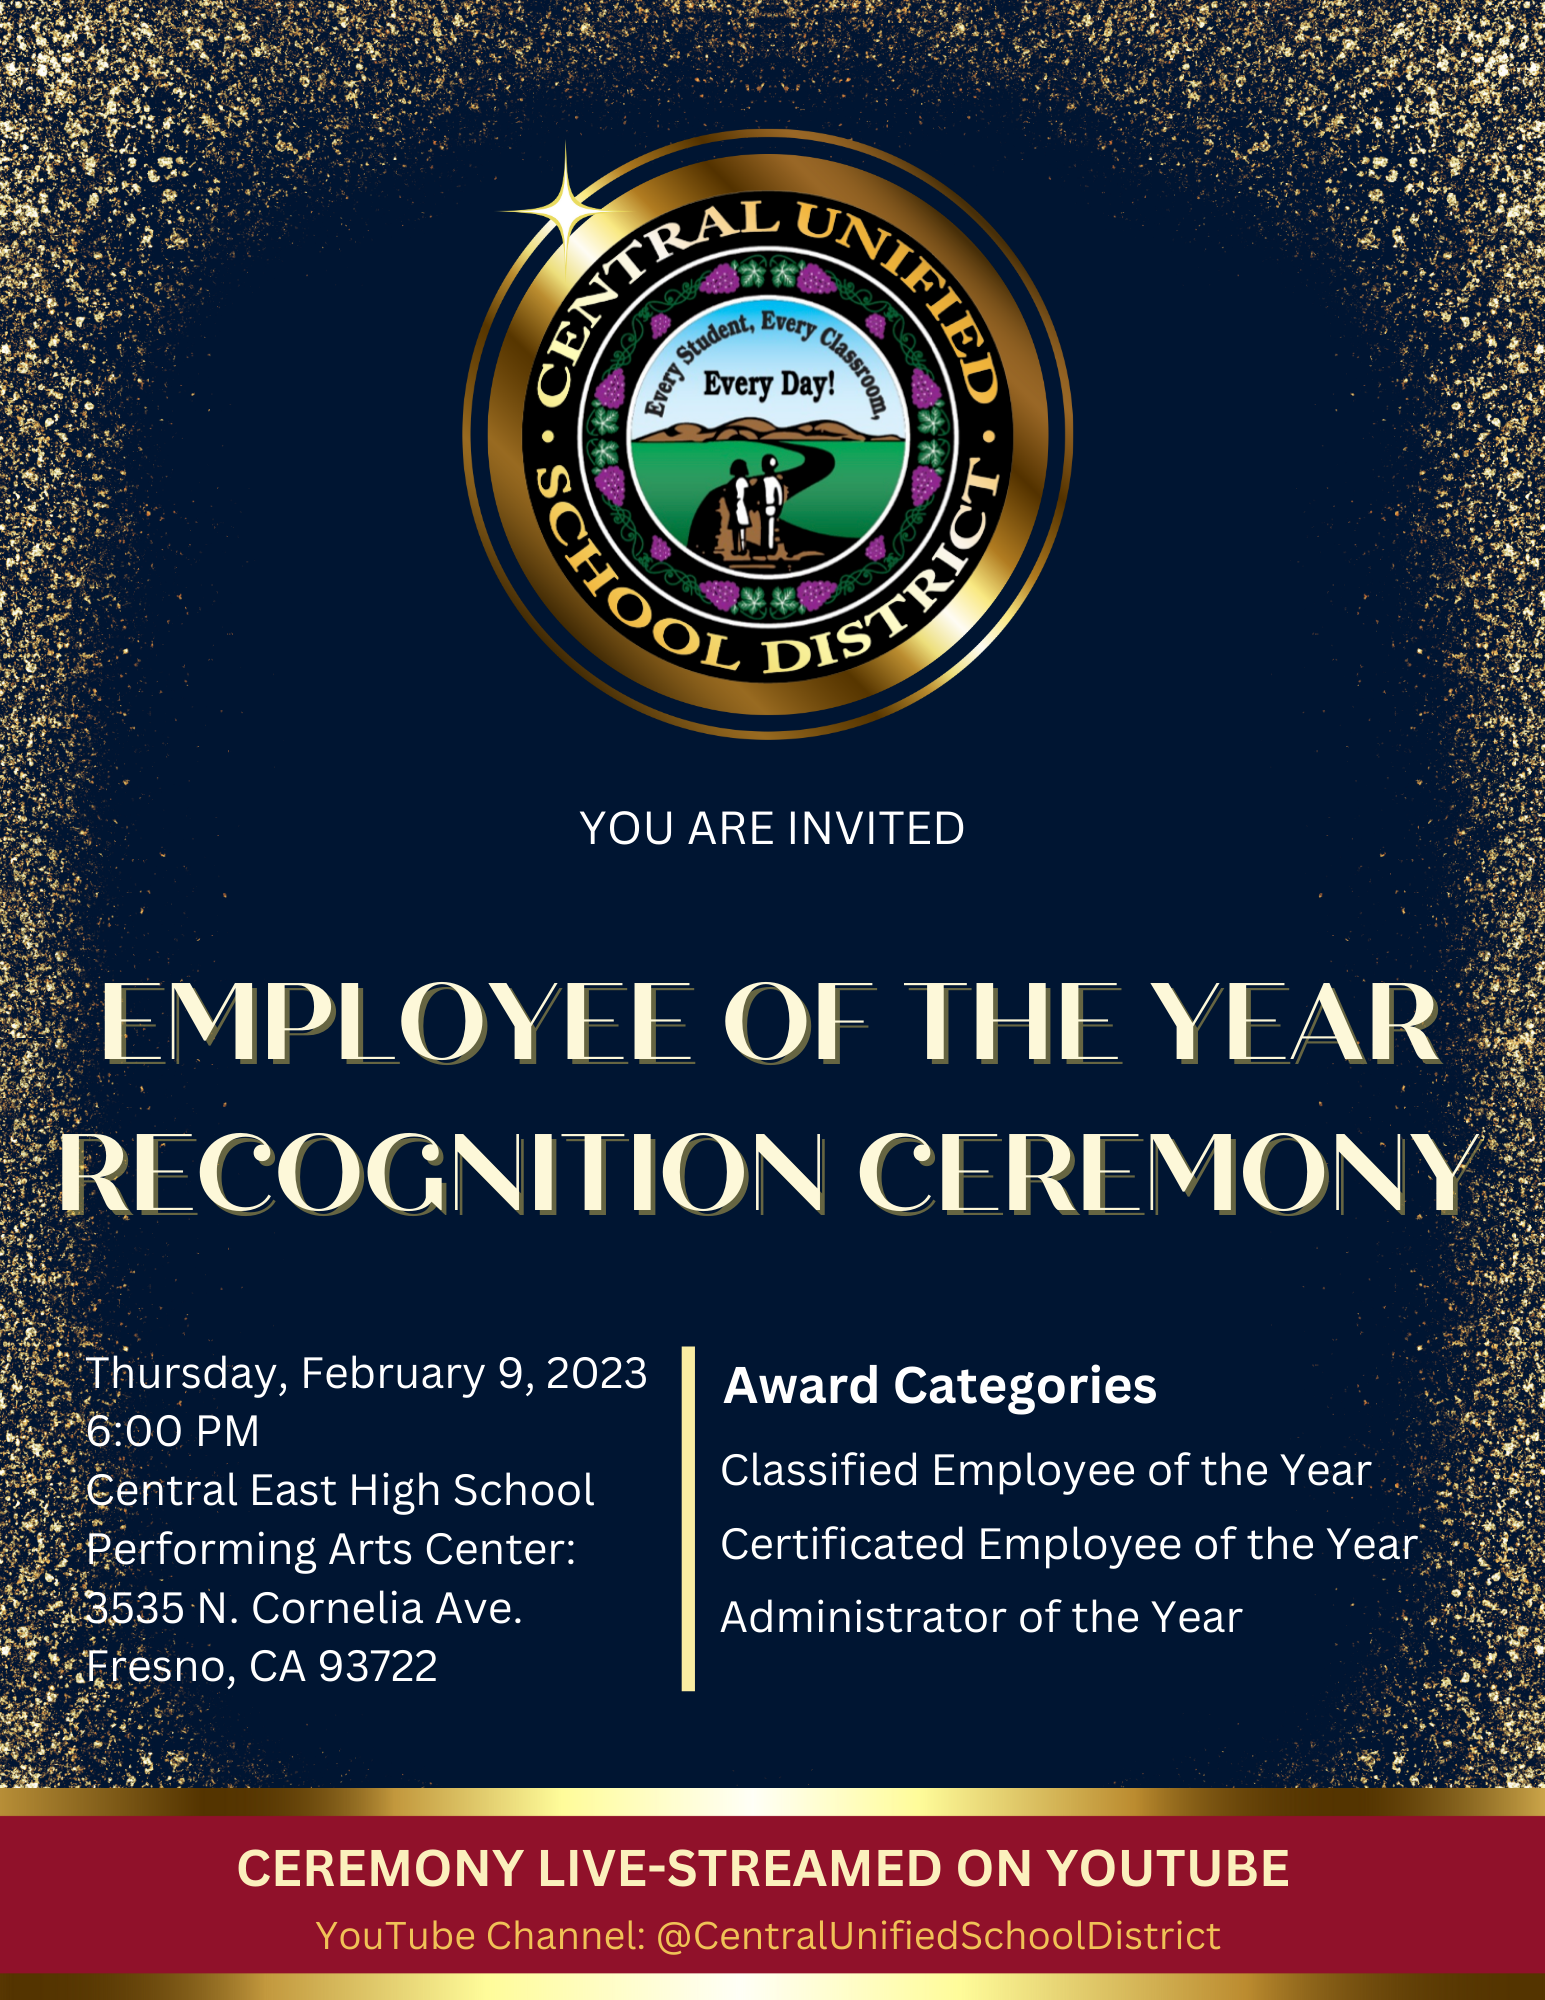 Employee of the Year Ceremony Invitation 